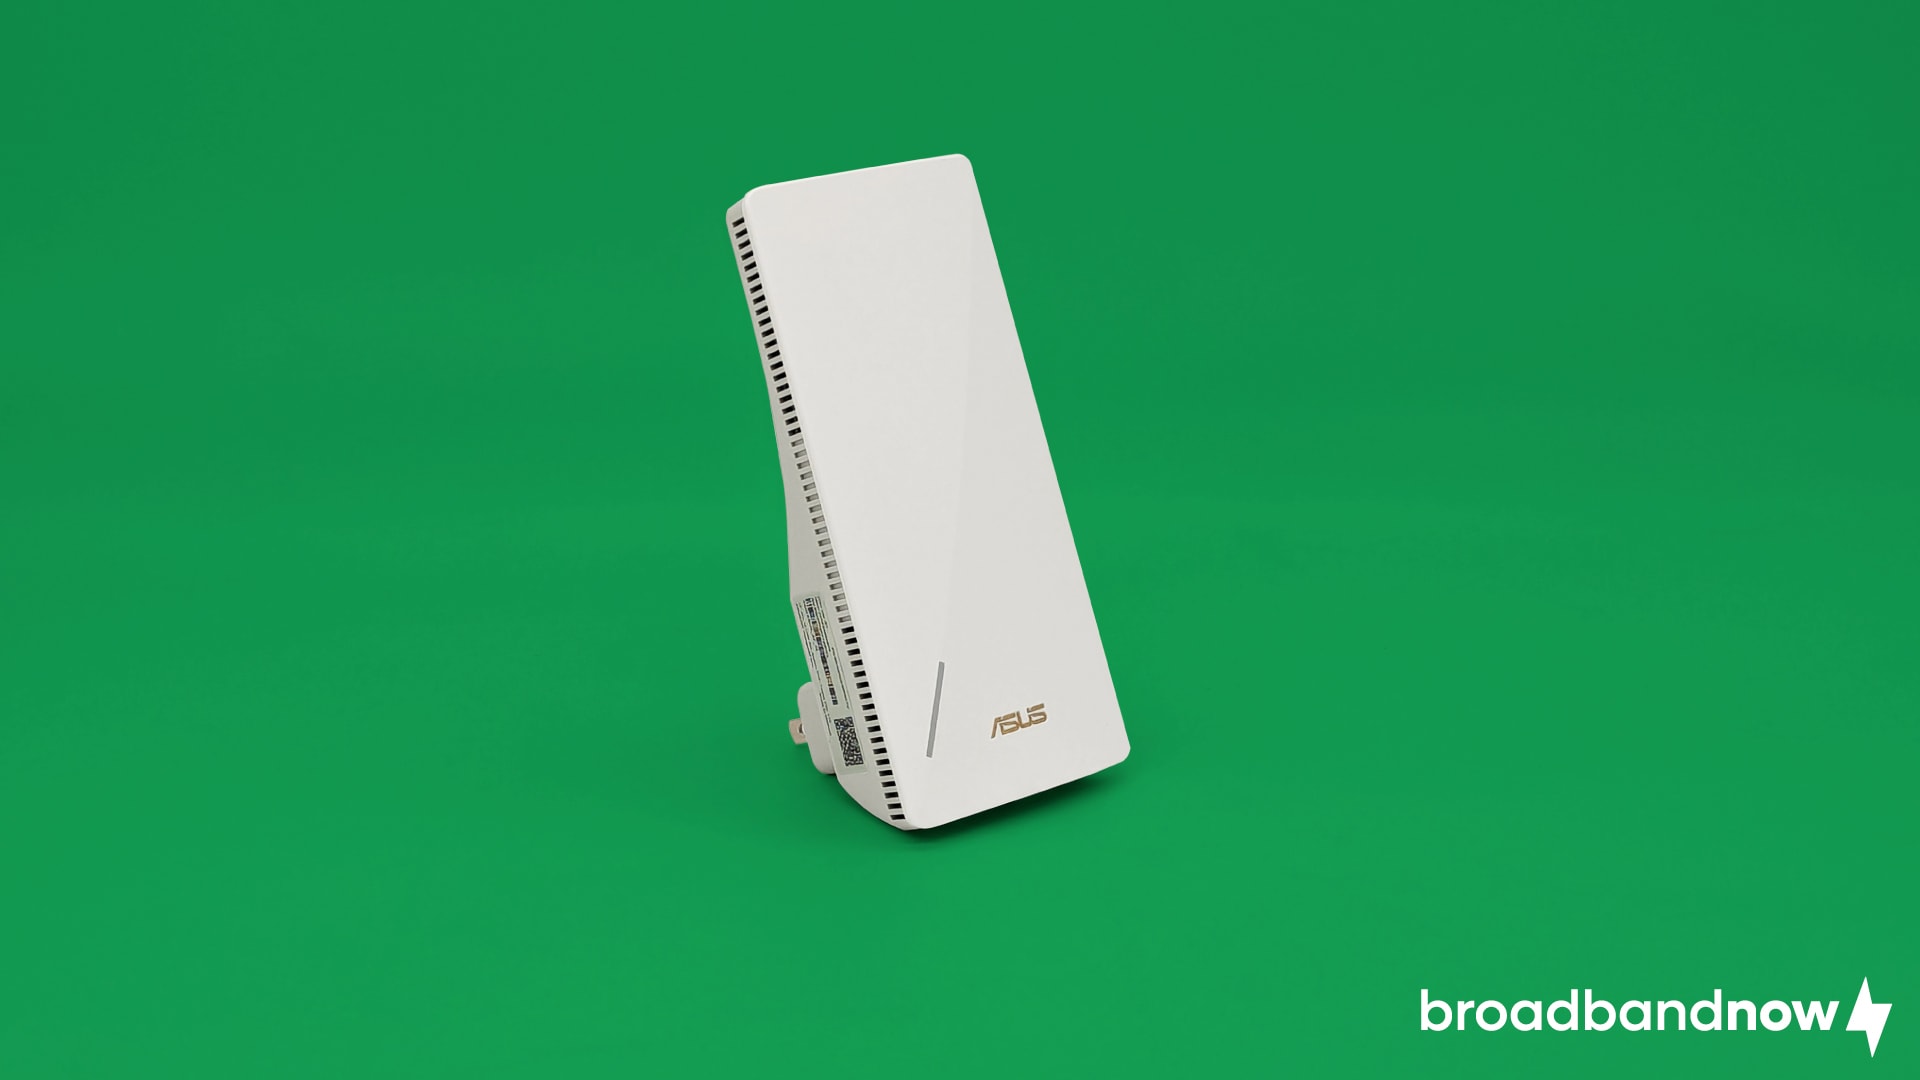 An Asus RP-AX58 Wi-Fi extender on a green background.